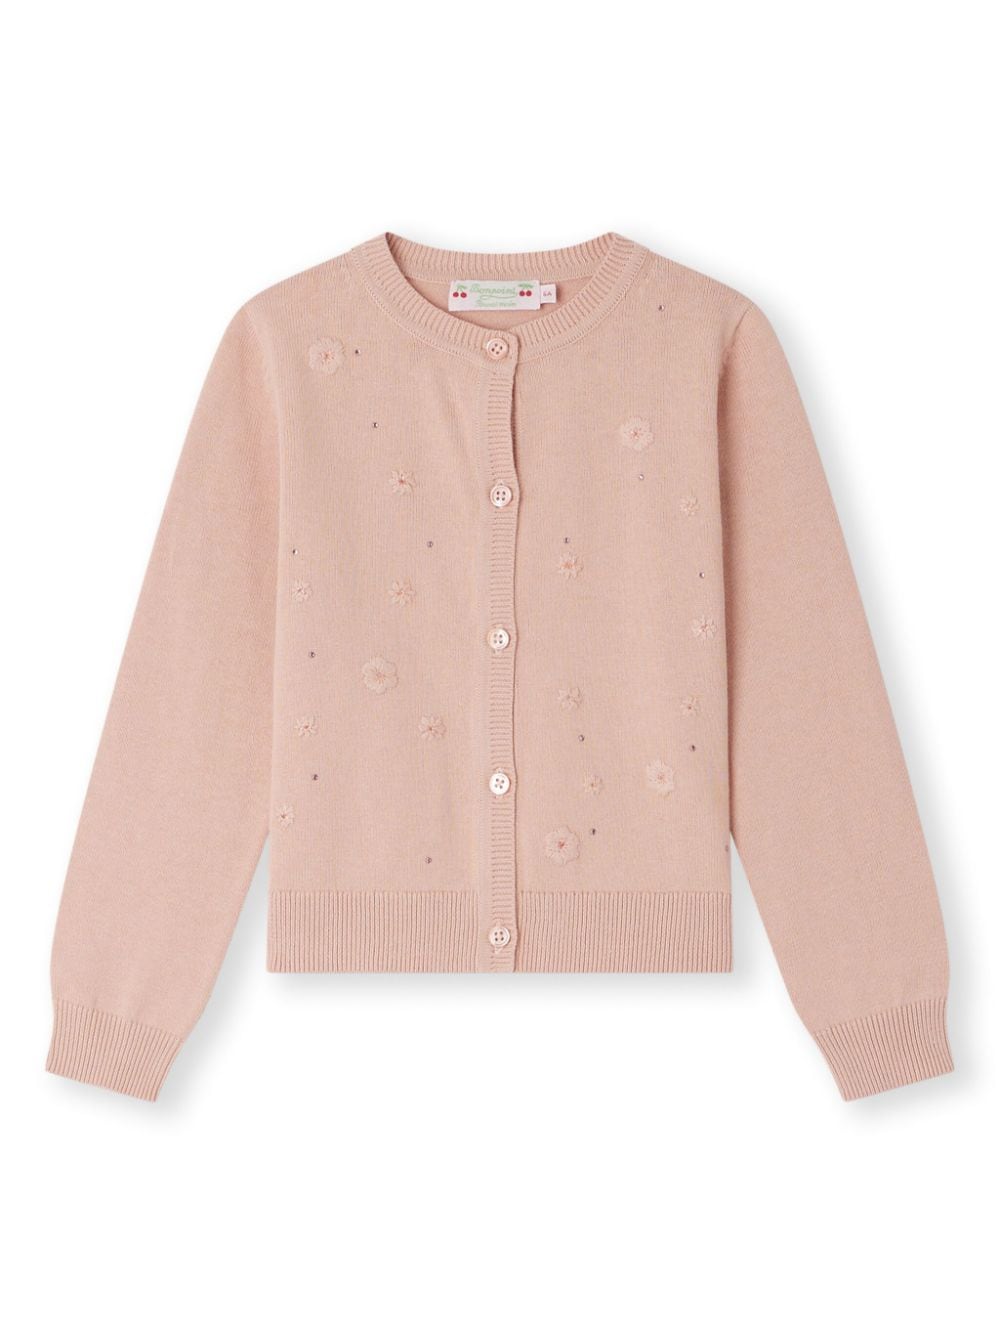 Bonpoint Kids' Francille Floral Cotton Cardigan In Pink